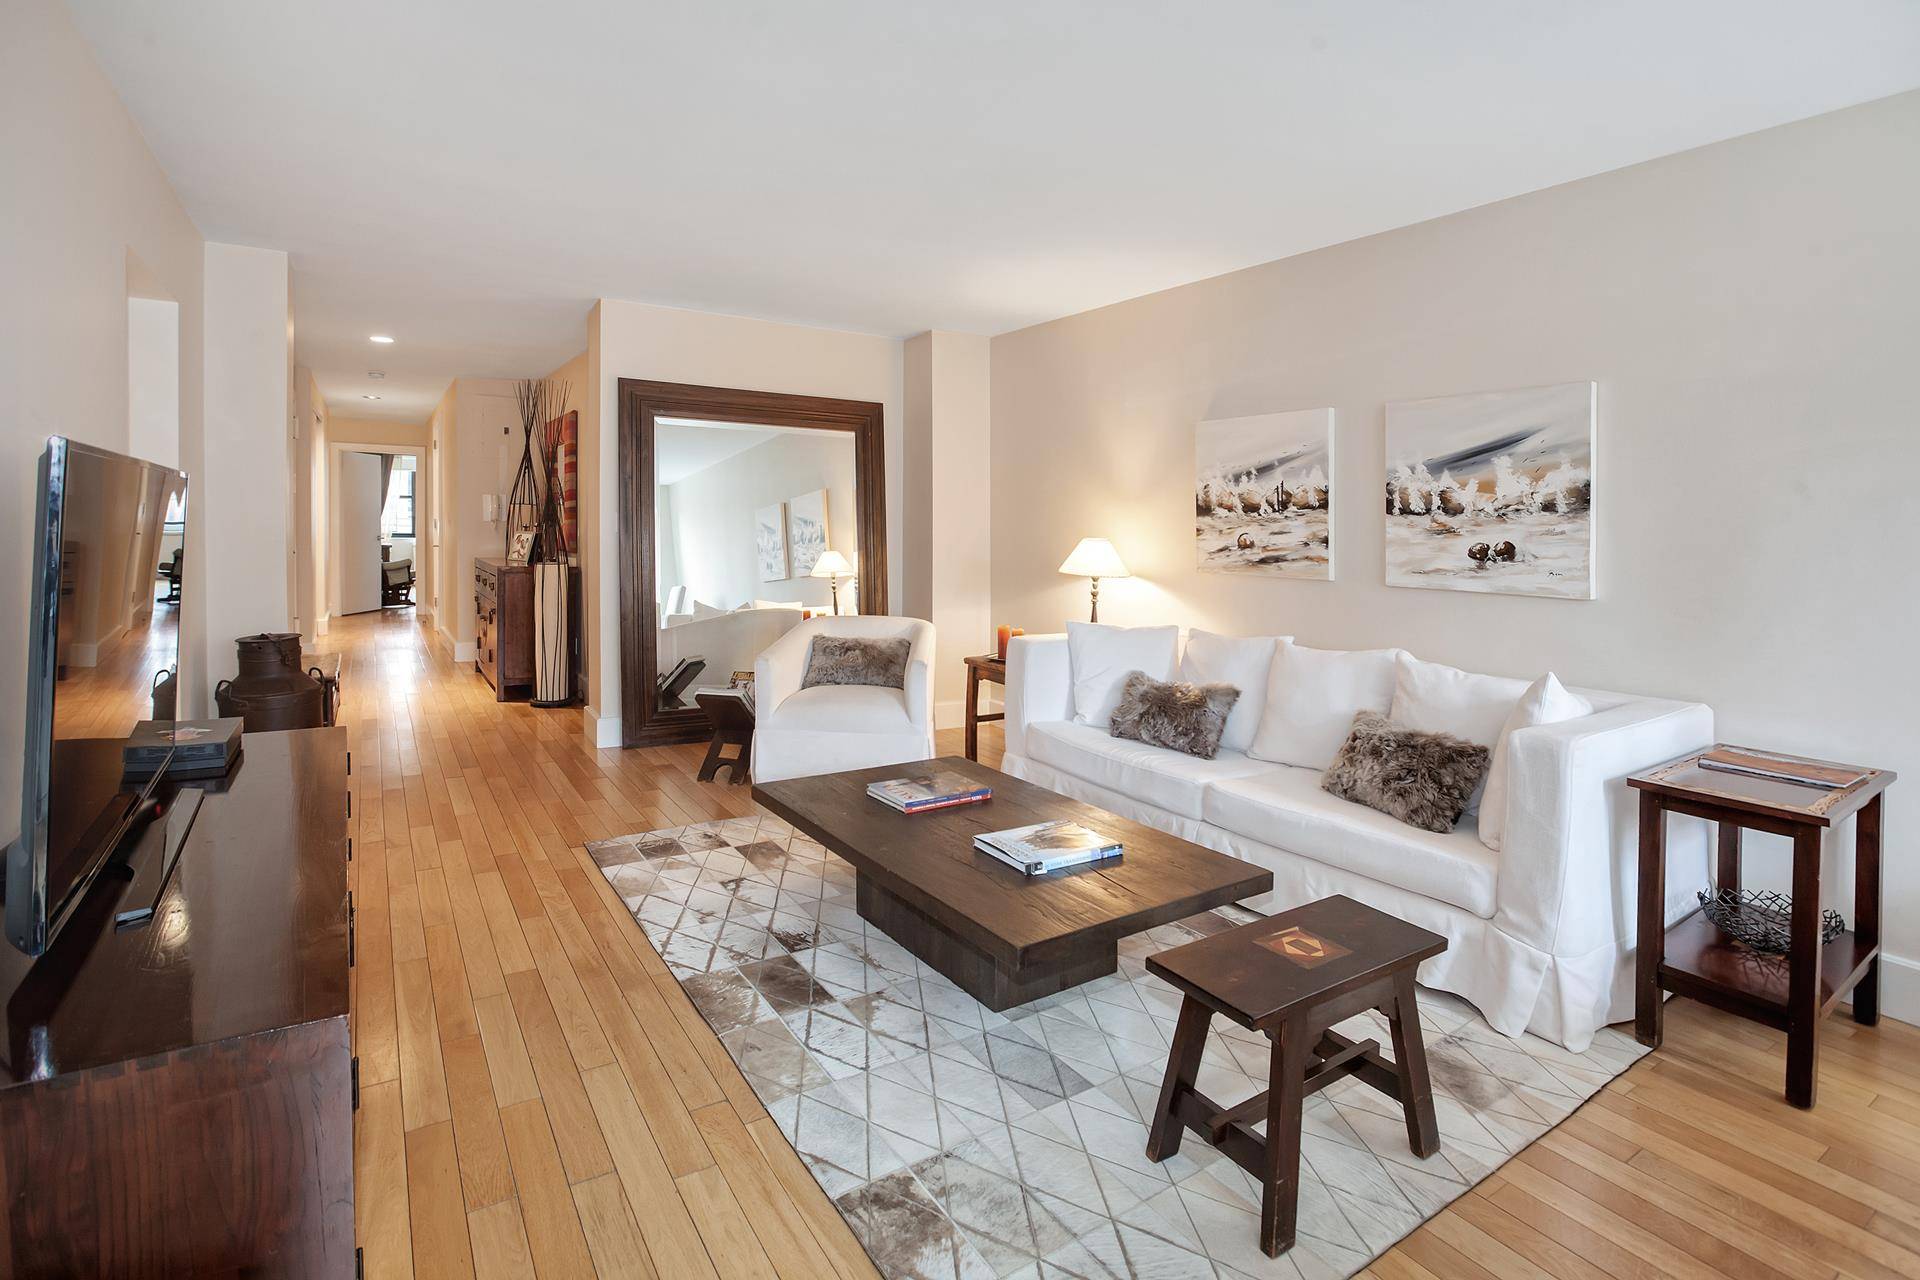 UNMATCHABLE VALUE presented in this TRULY UNIQUE floor through, sun filled home on the Upper East Side west of Third Avenue !